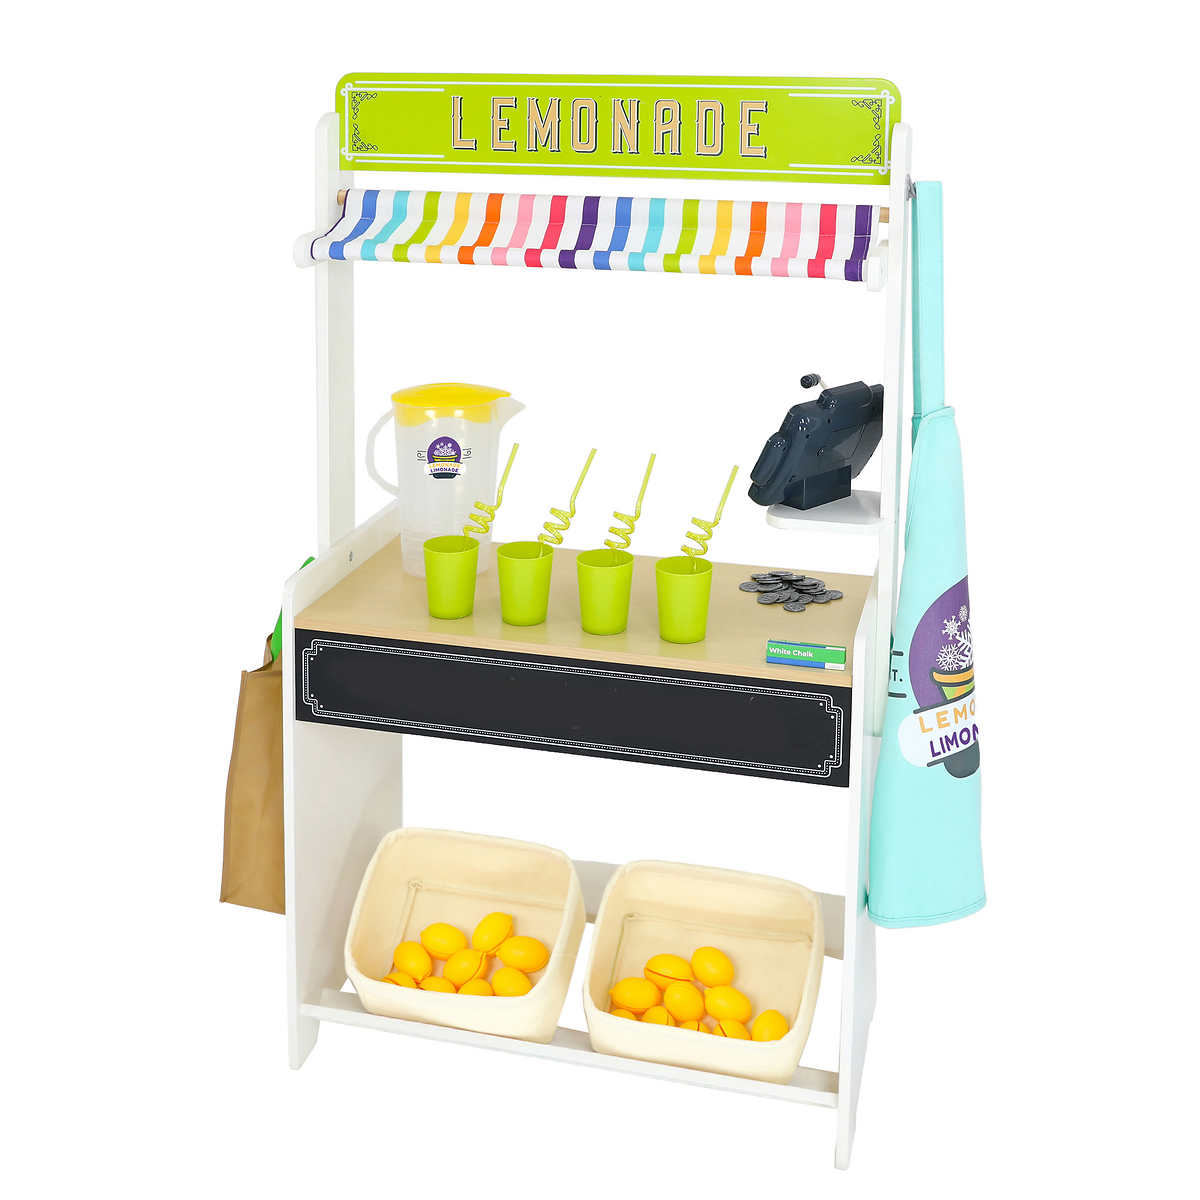 Kid's Wooden Lemonade Stand & Accessories $40.  Reg $69.  F/S from Costco.